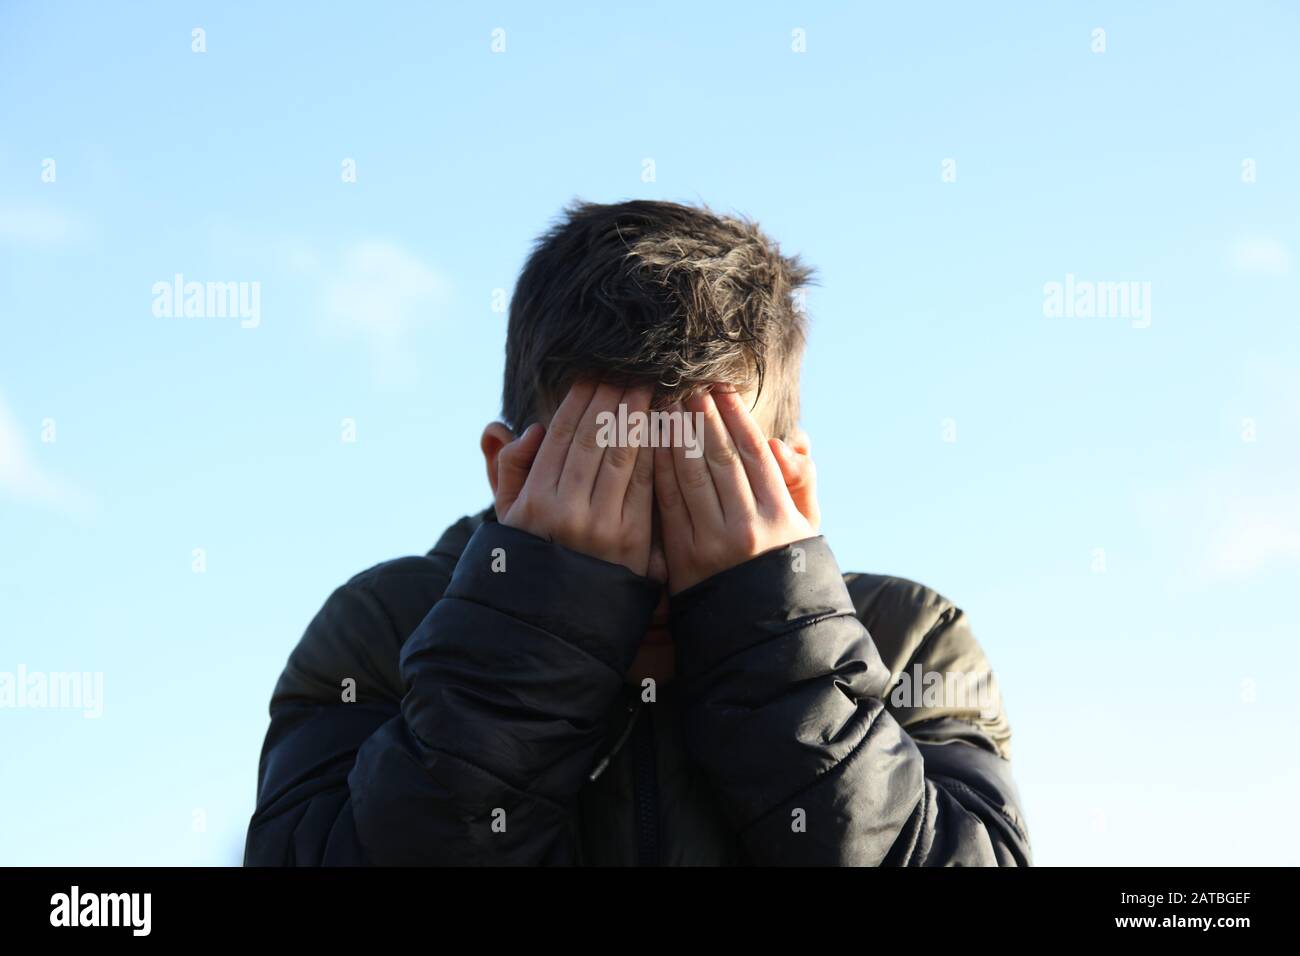 A young boy of 12 covers his muddy face with his hands, facing camera Stock Photo